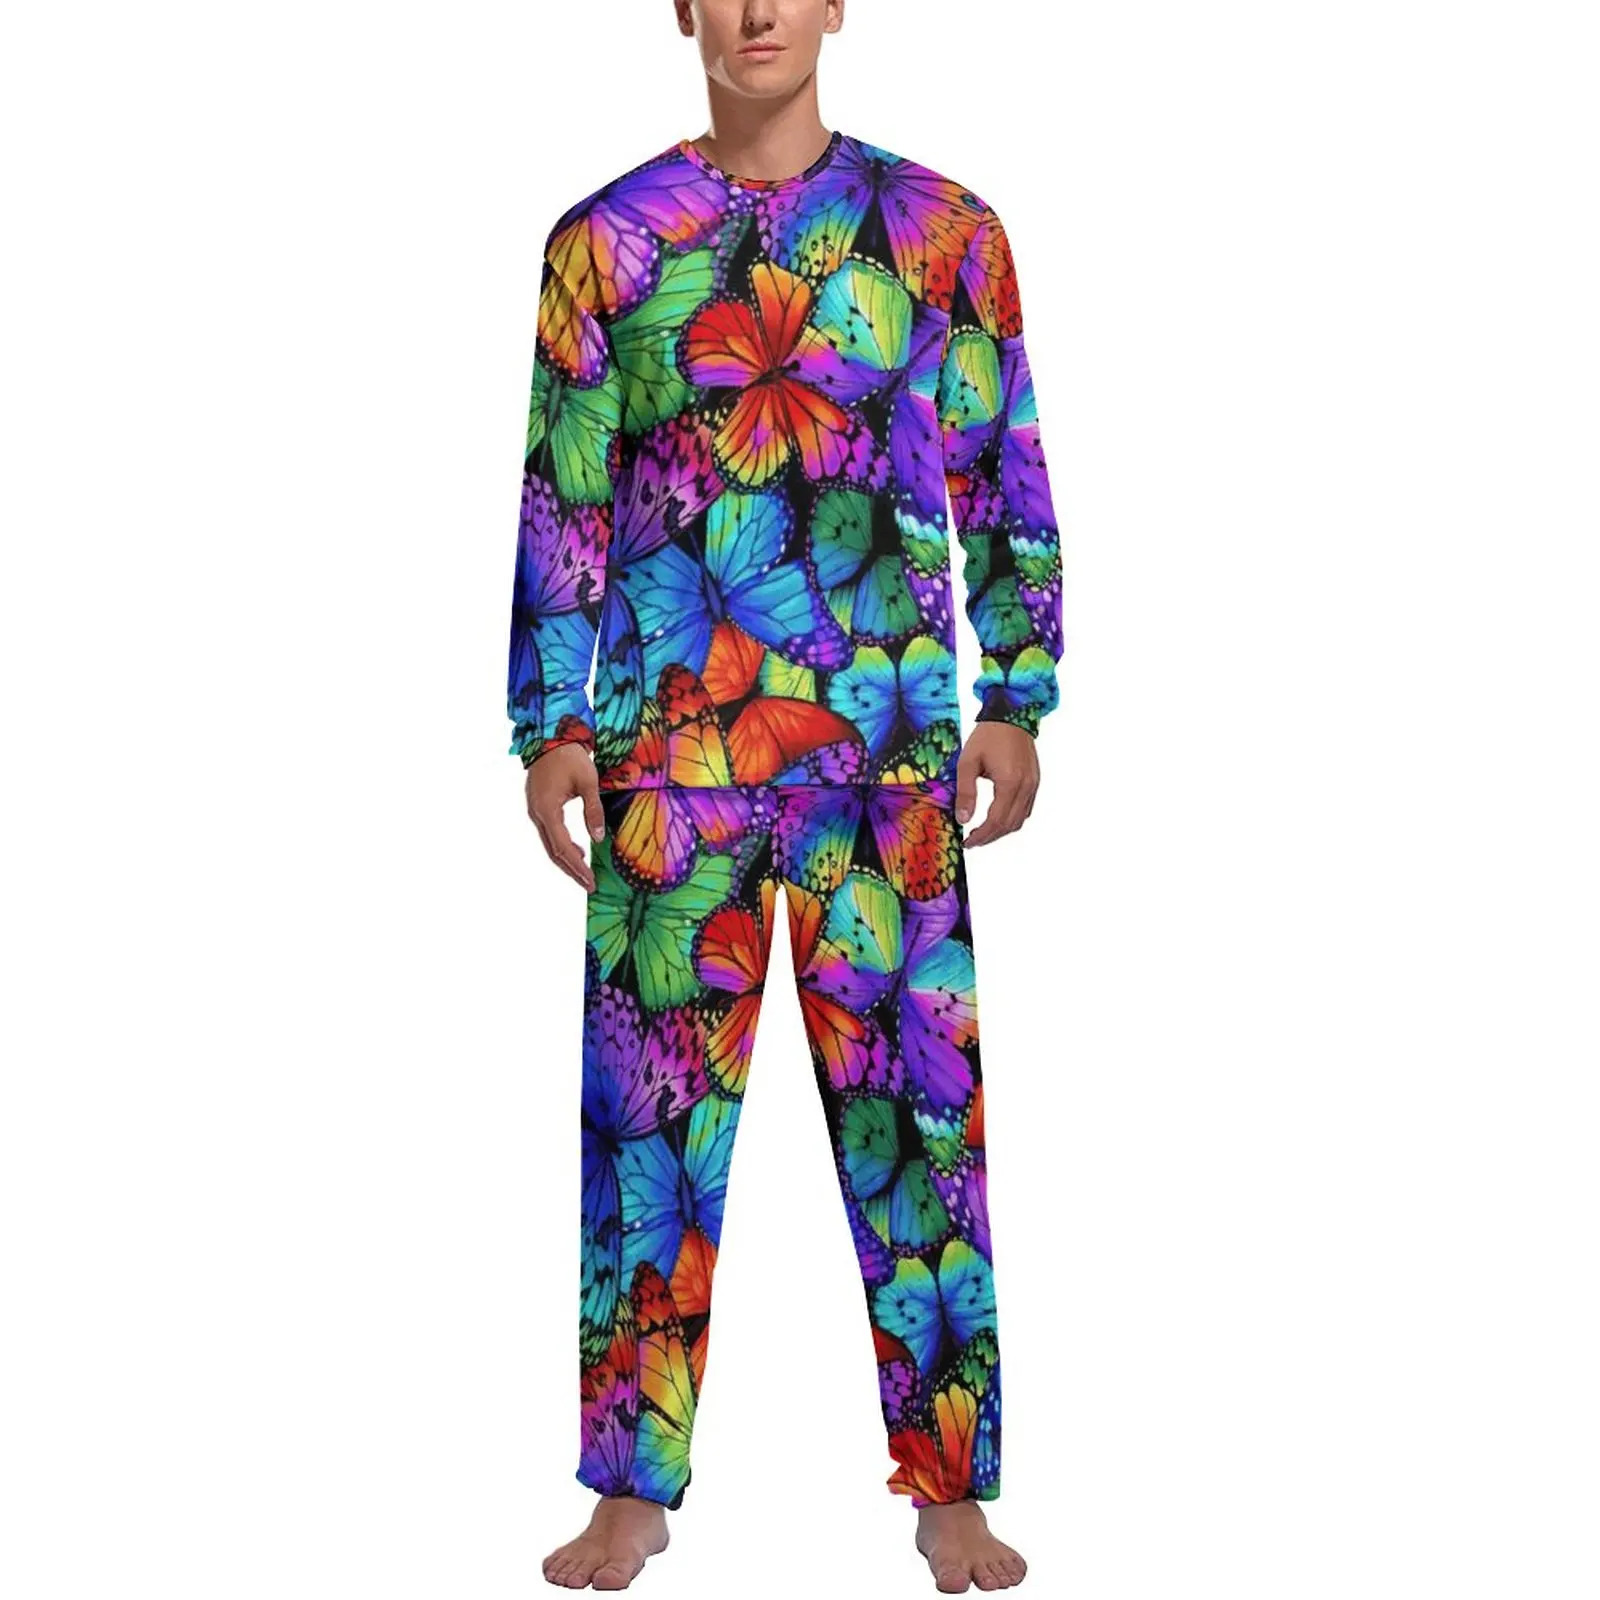 Colorful Butterfly Pajamas Winter Neon Animal Print Leisure Home Suit Men 2 Pieces Graphic Long Sleeve Cool Pajama Sets